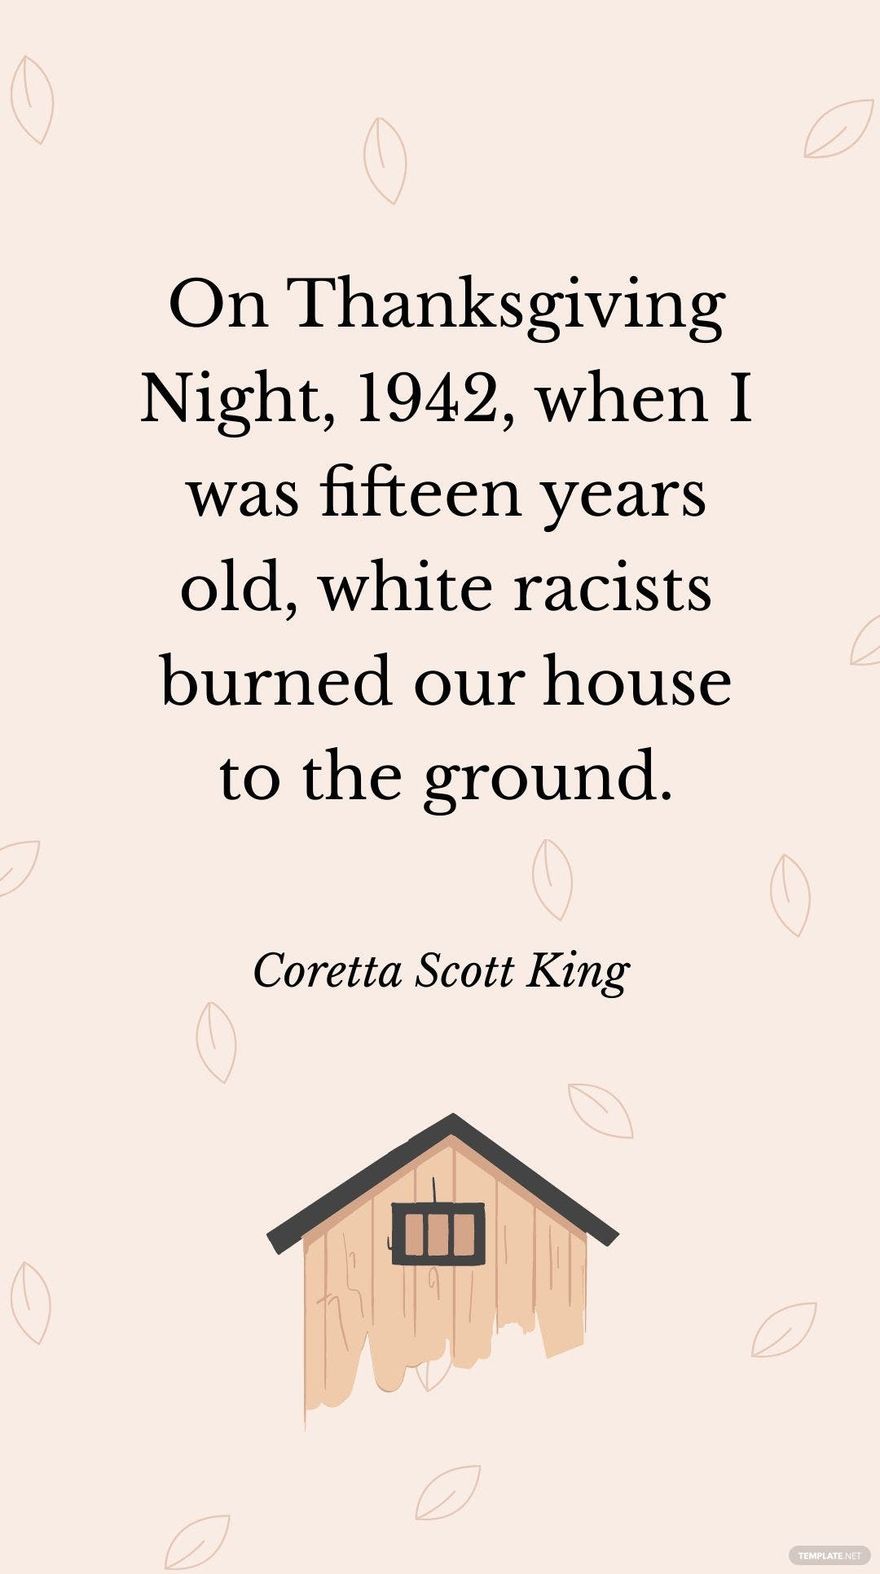 Coretta Scott King - On Thanksgiving Night, 1942, when I was fifteen years old, white racists burned our house to the ground. in JPG